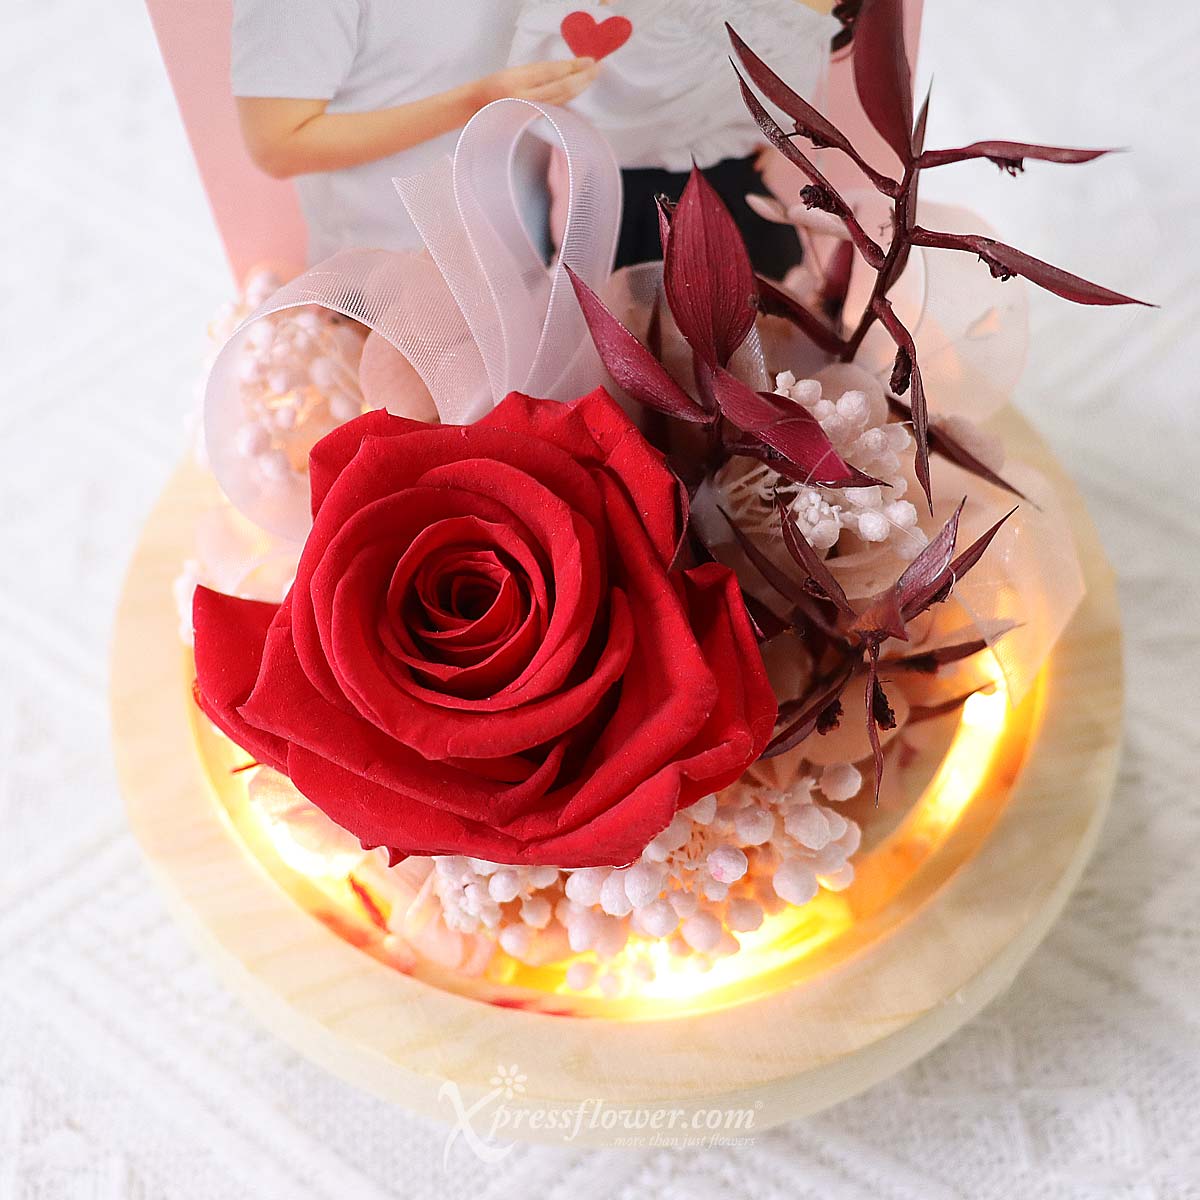 PR2305 Everlasting Romance (Preserved Flowers with Personalised Photo) 1c